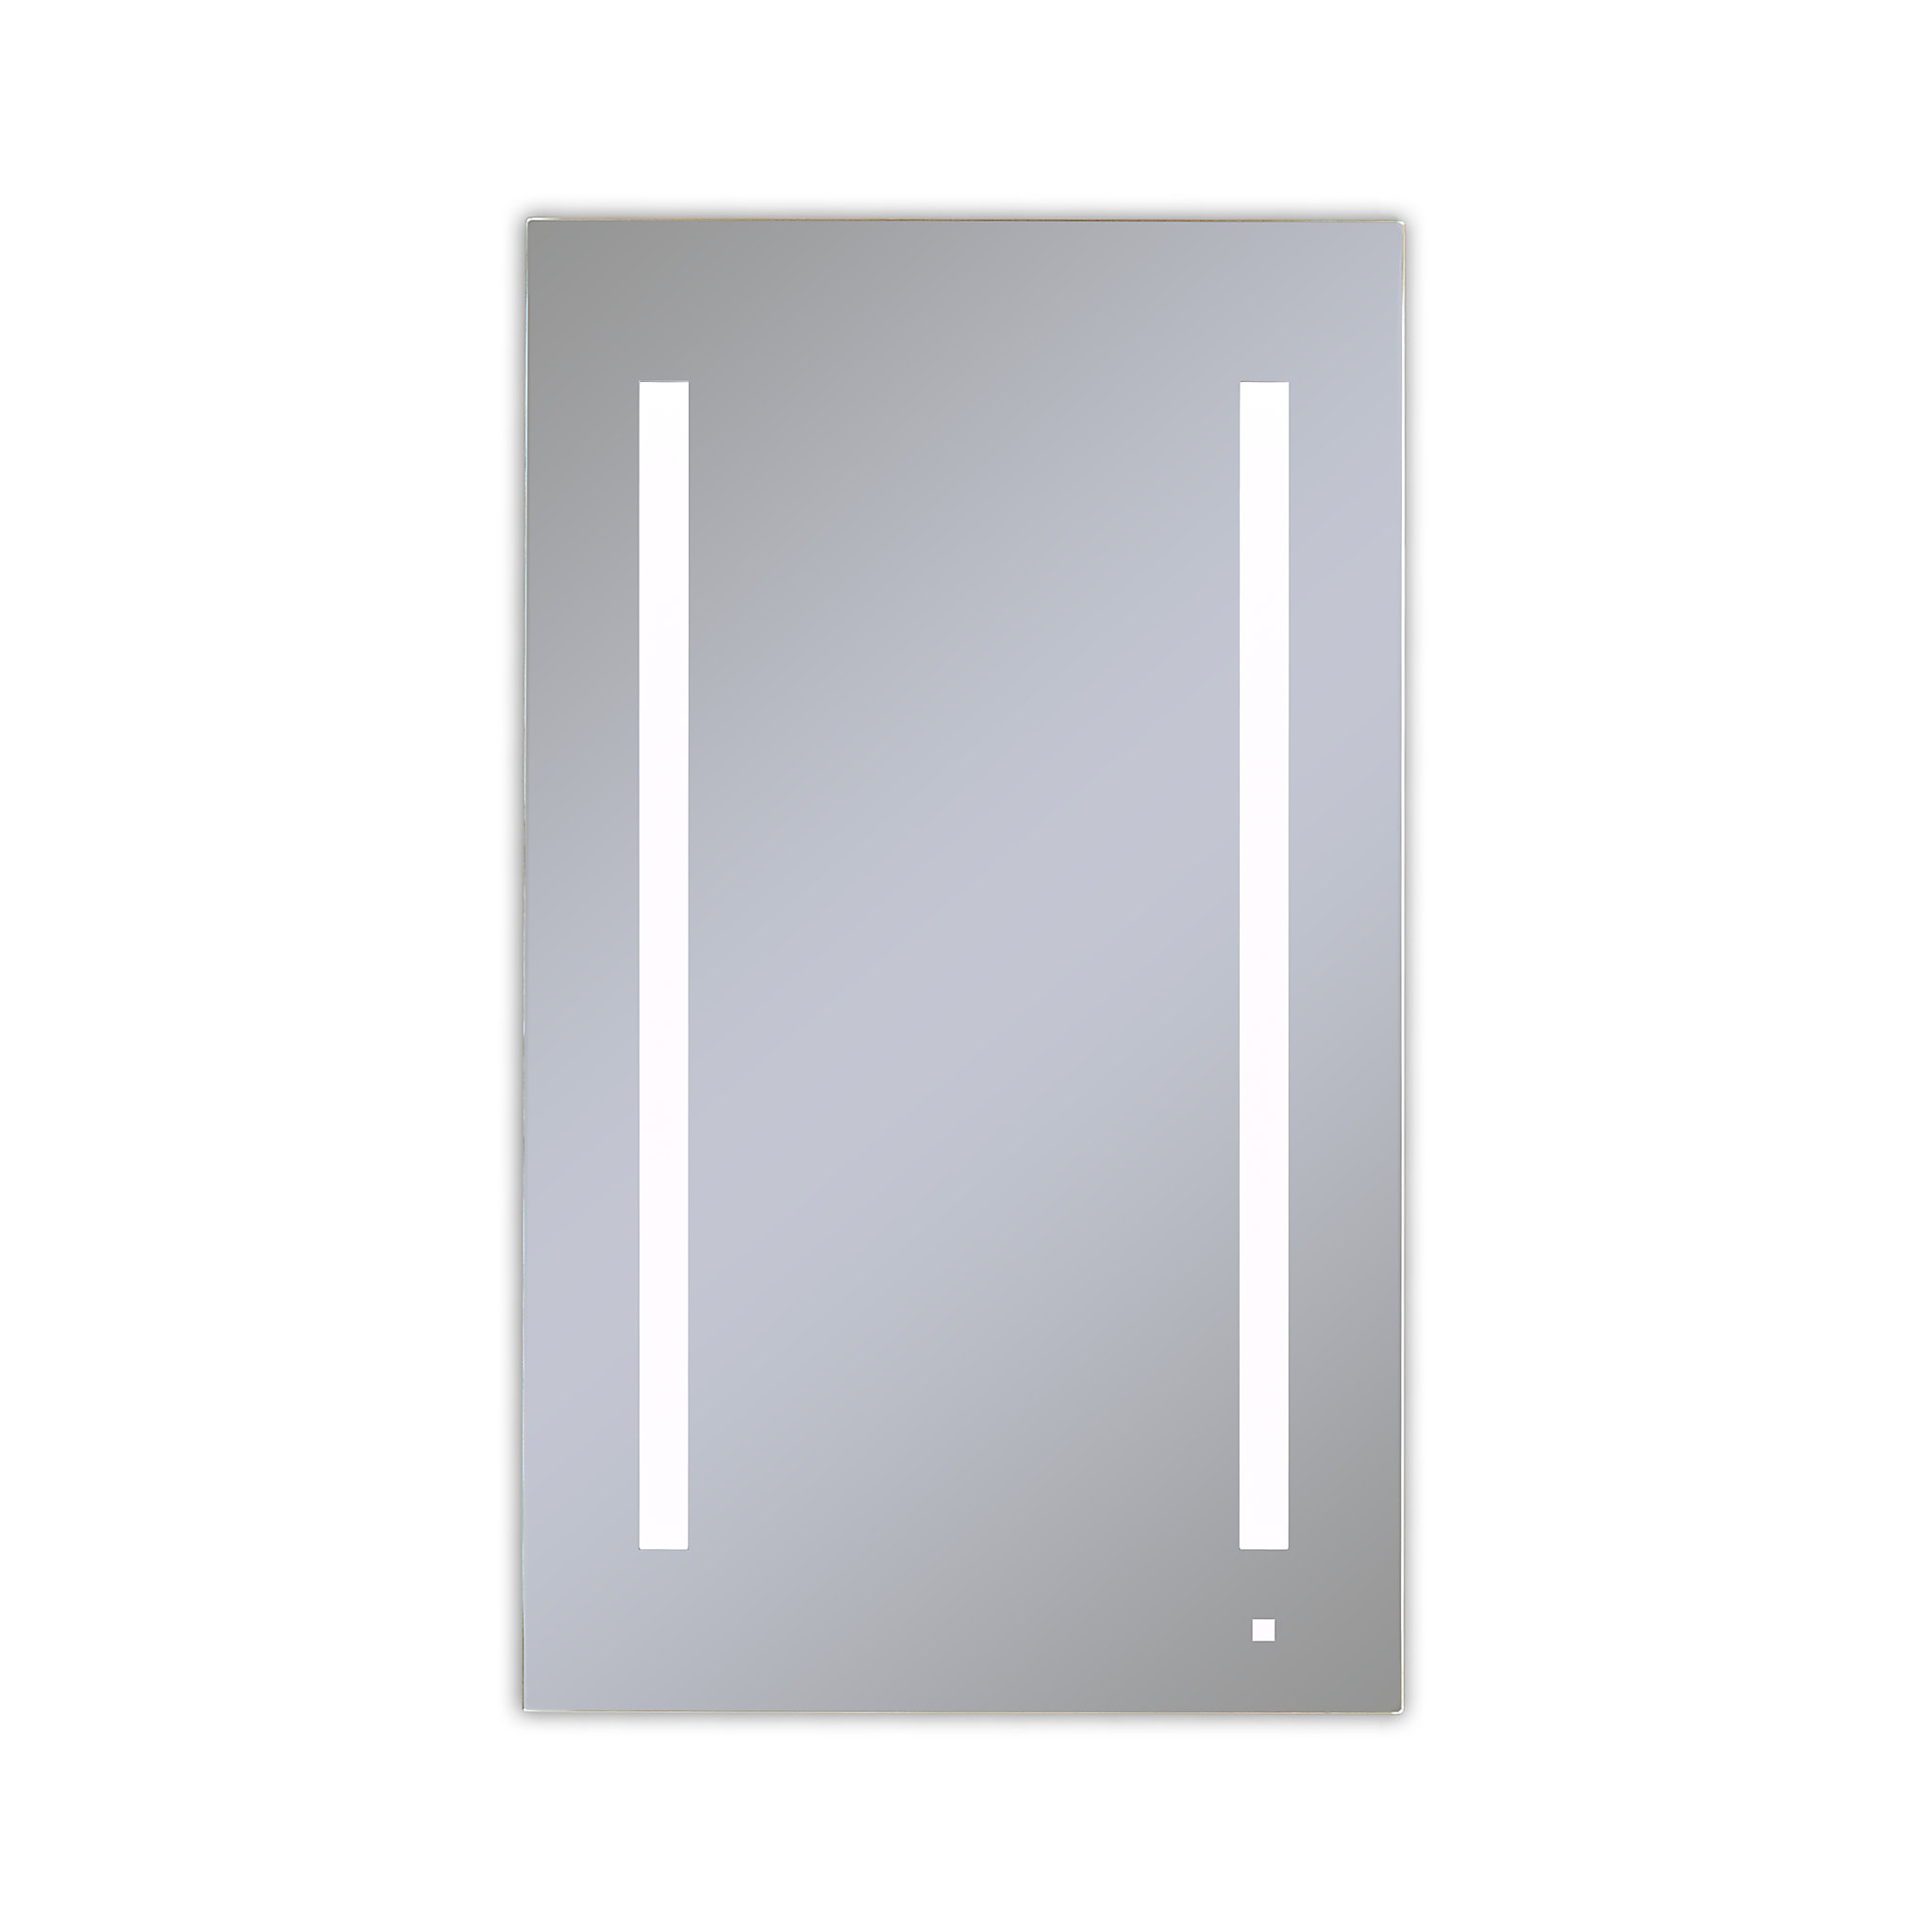 Robern AC2440D4P1LA AiO Lighted Cabinet, 24" x 40" x 4", LUM Lighting, 4000K Temperature (Cool Light), Dimmable, OM Audio, Elect